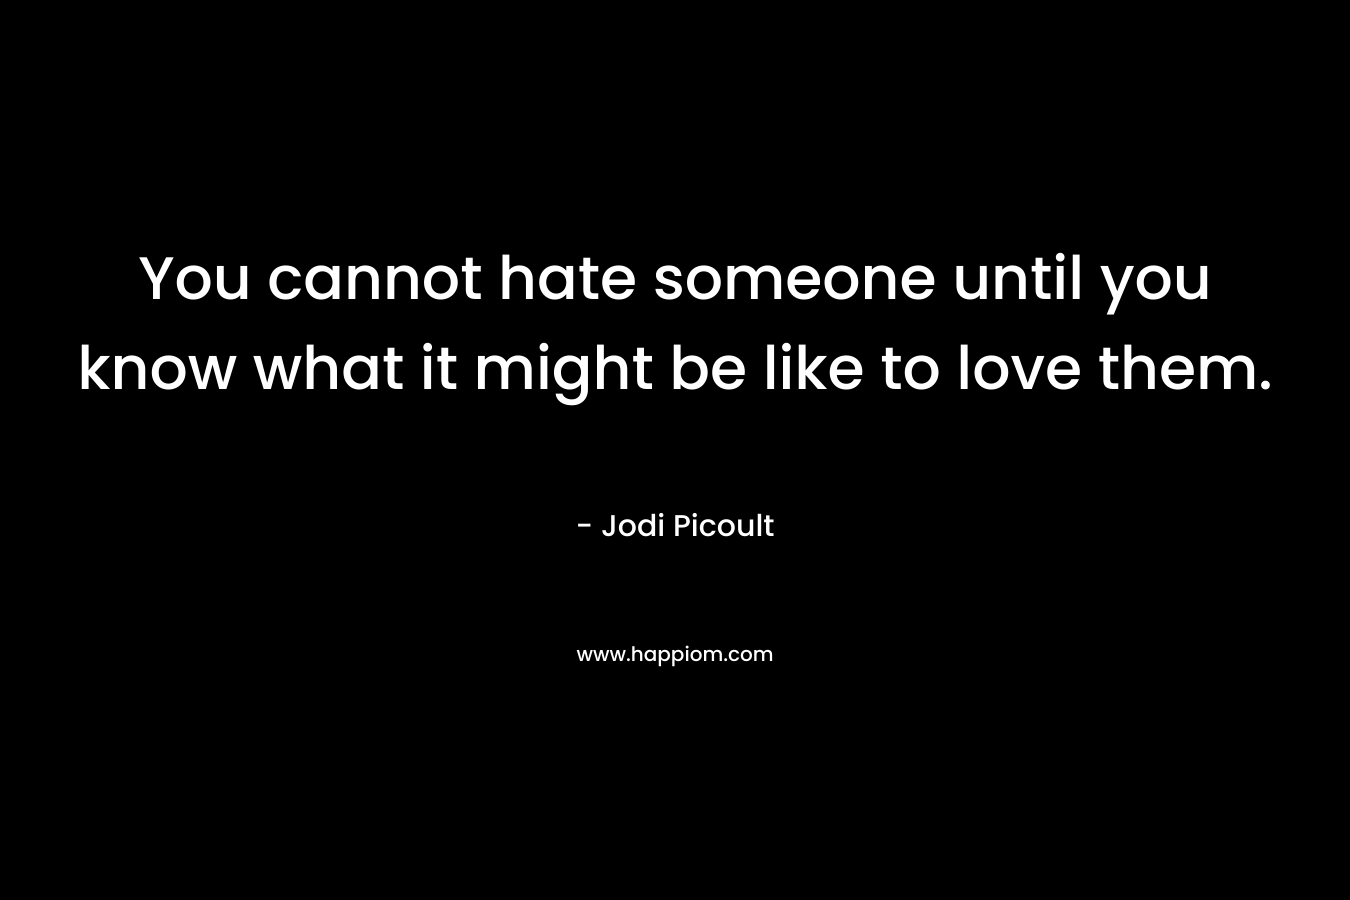 You cannot hate someone until you know what it might be like to love them.